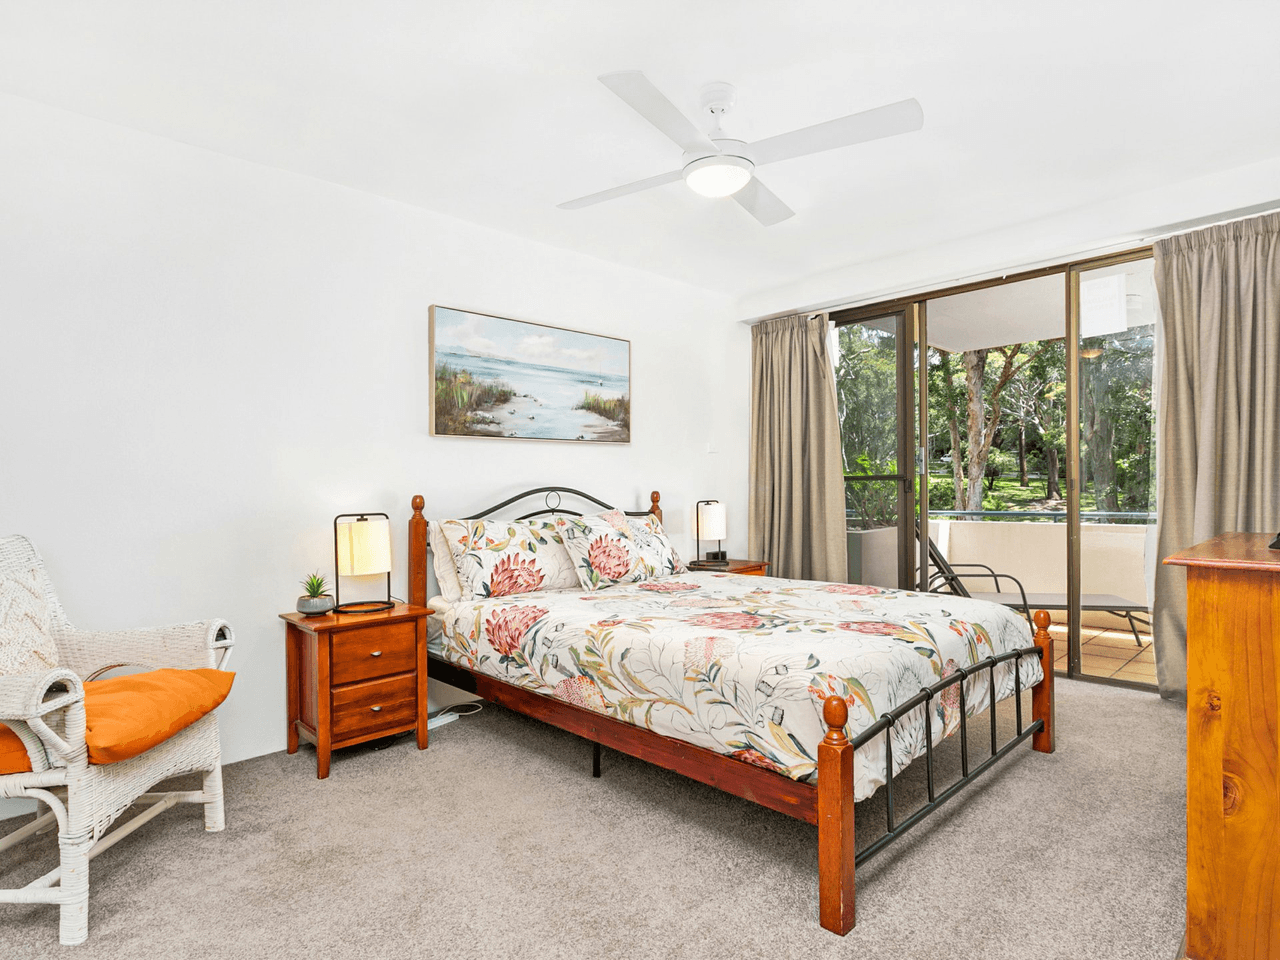 2/17 Mistral Close, NELSON BAY, NSW 2315